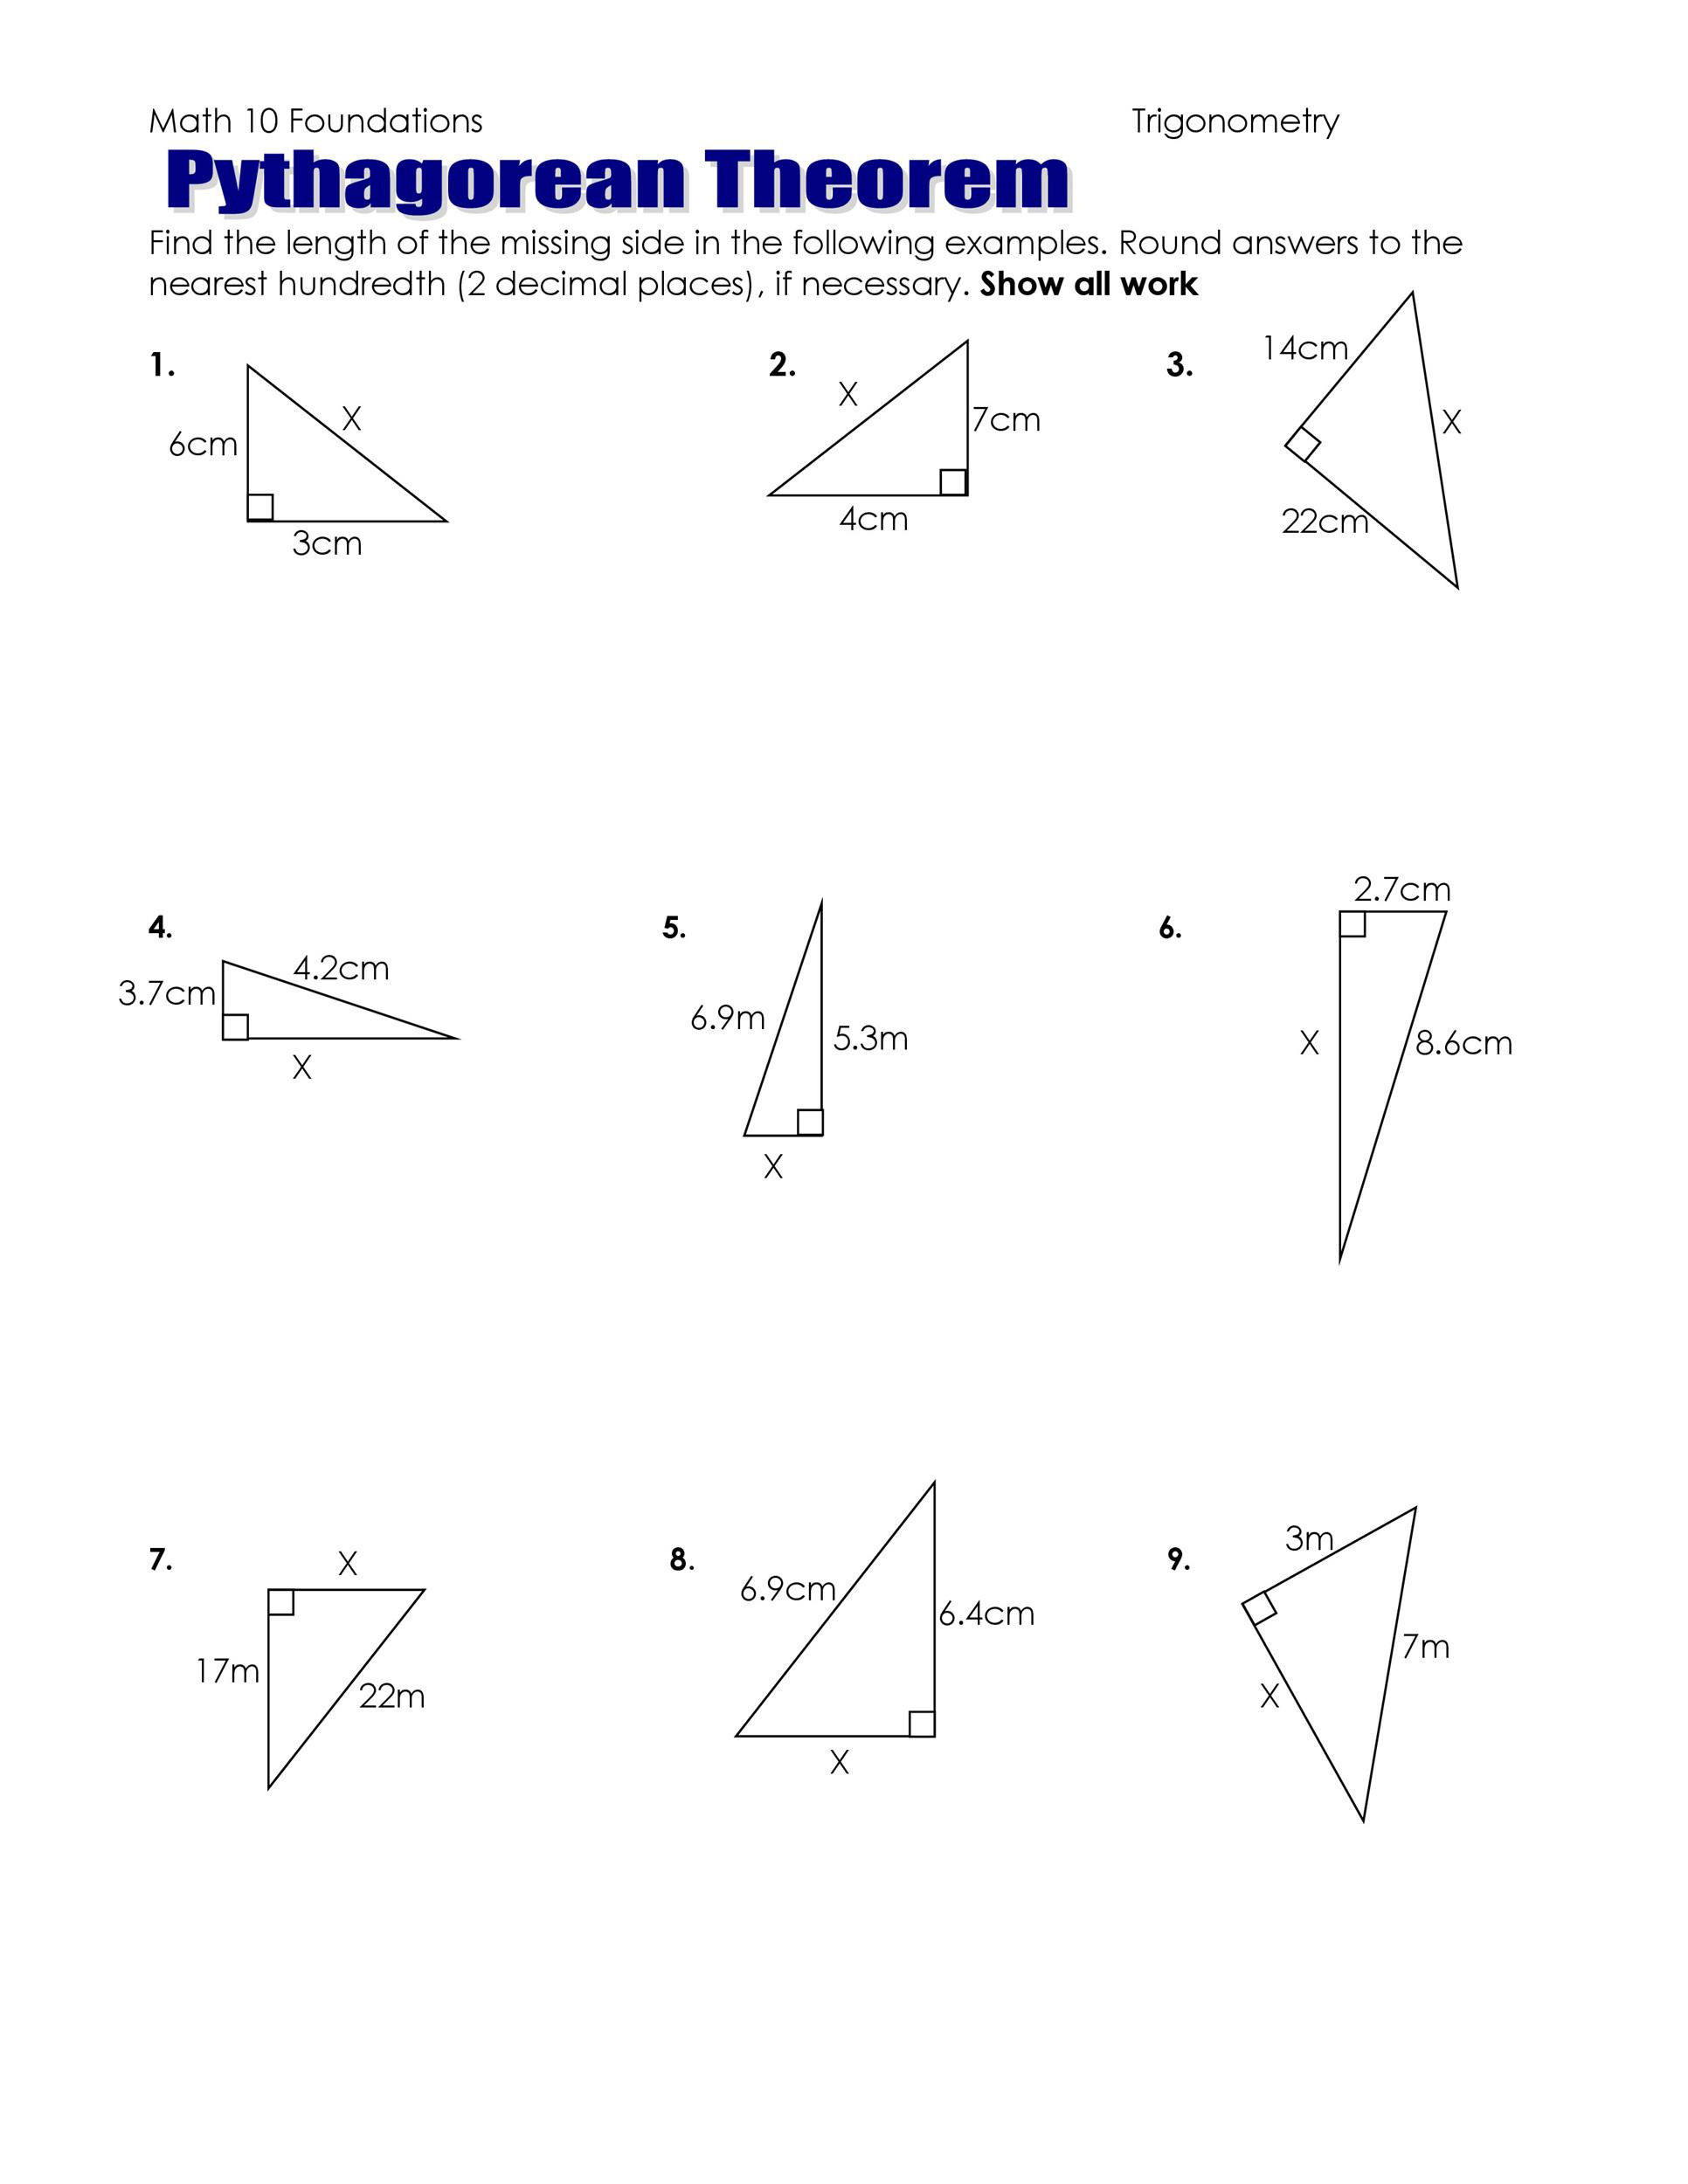 Pythagoras theorem Worksheet with Answers 48 Pythagorean theorem Worksheet with Answers [word Pdf]